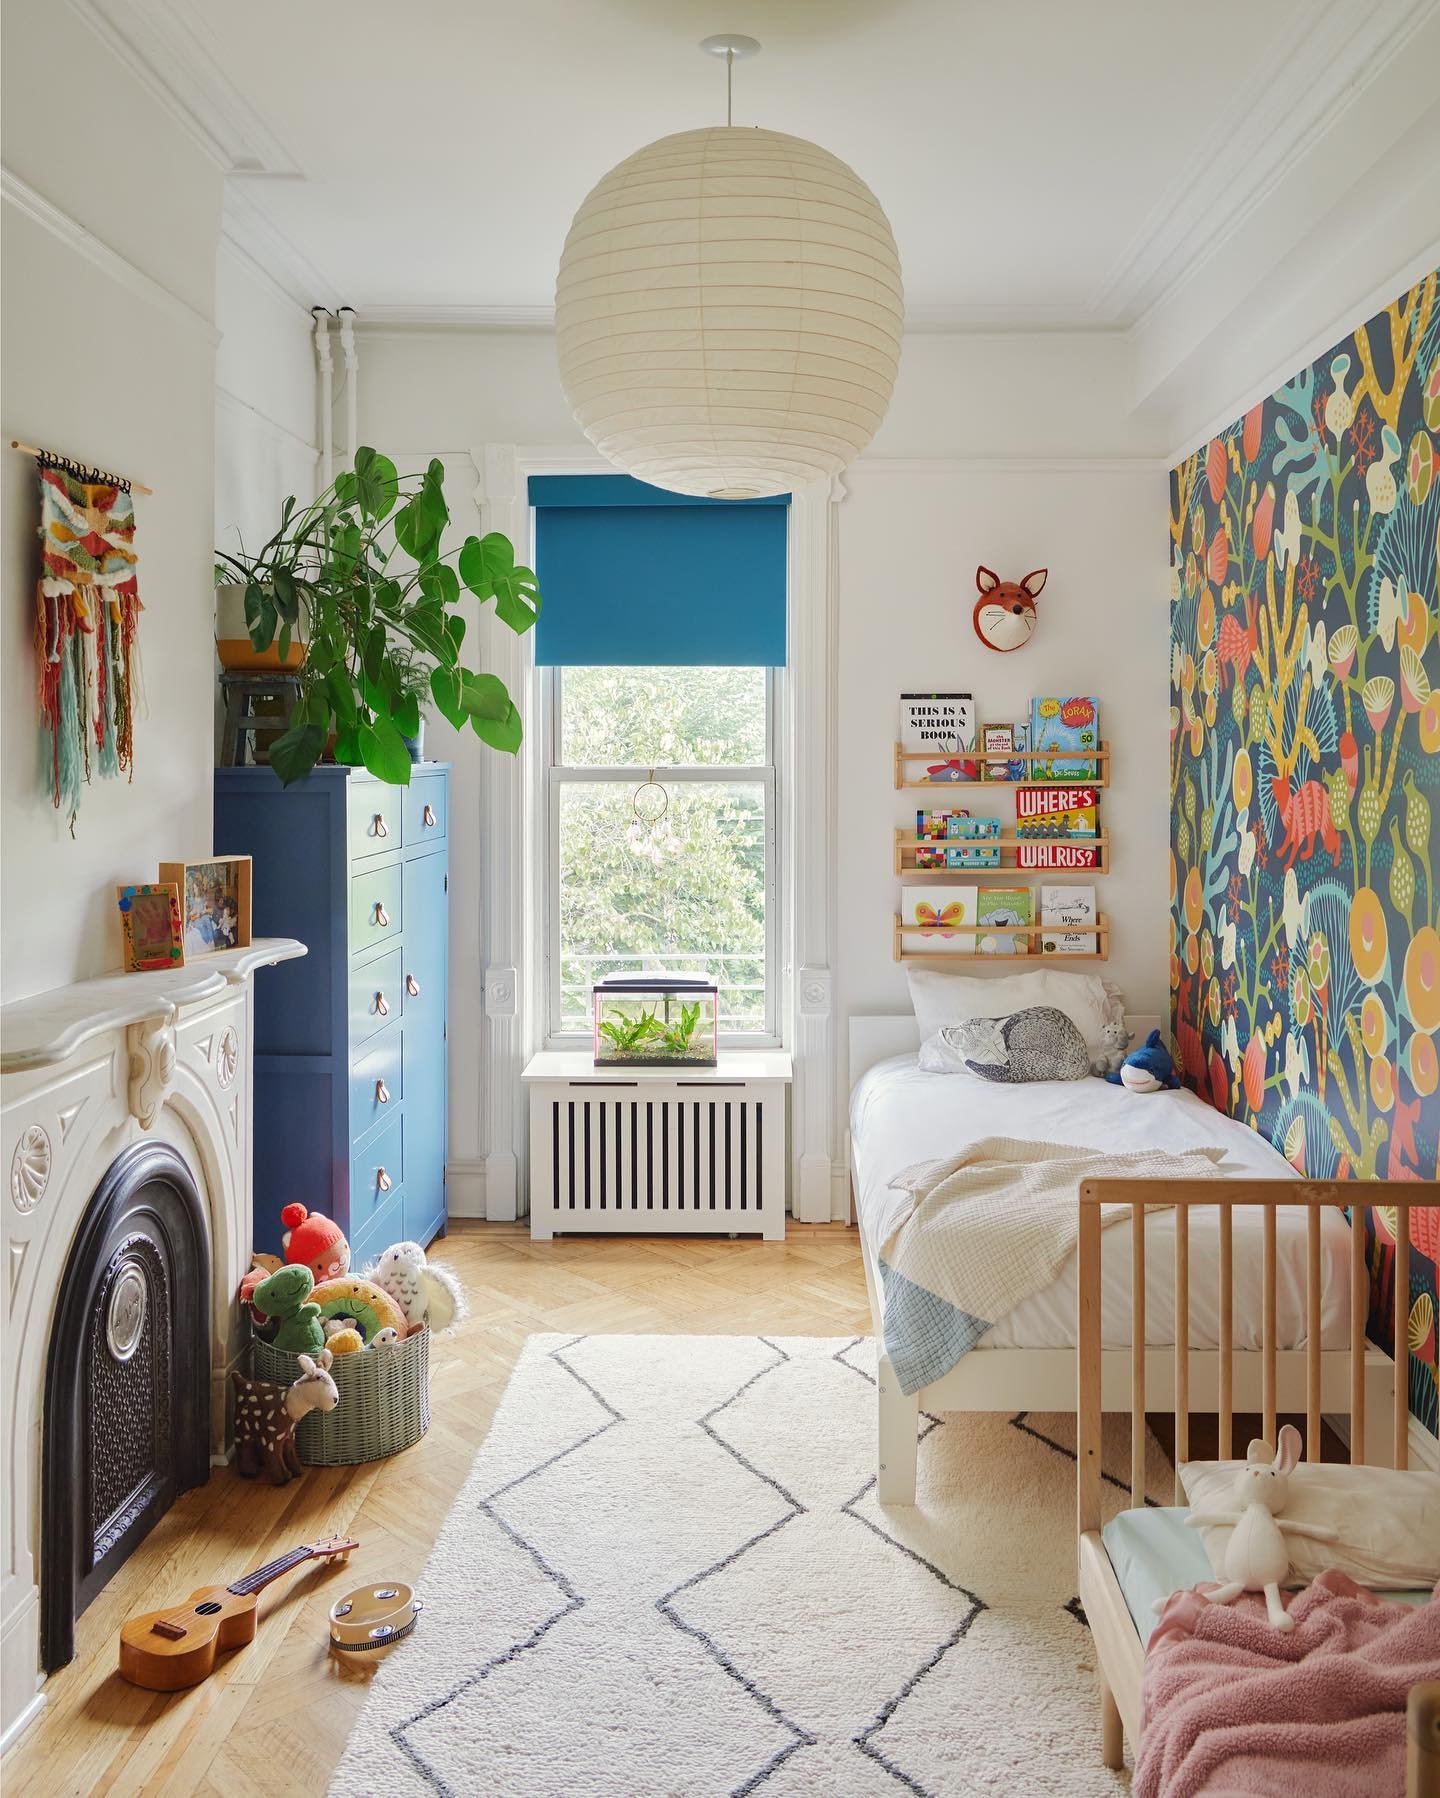 The best room in my house is of course the kid&rsquo;s room. They share this colorful jungle. It&rsquo;s a happy little space. My only advice for designing your child&rsquo;s room is make sure the rug is comfortable because you&rsquo;ll probably find